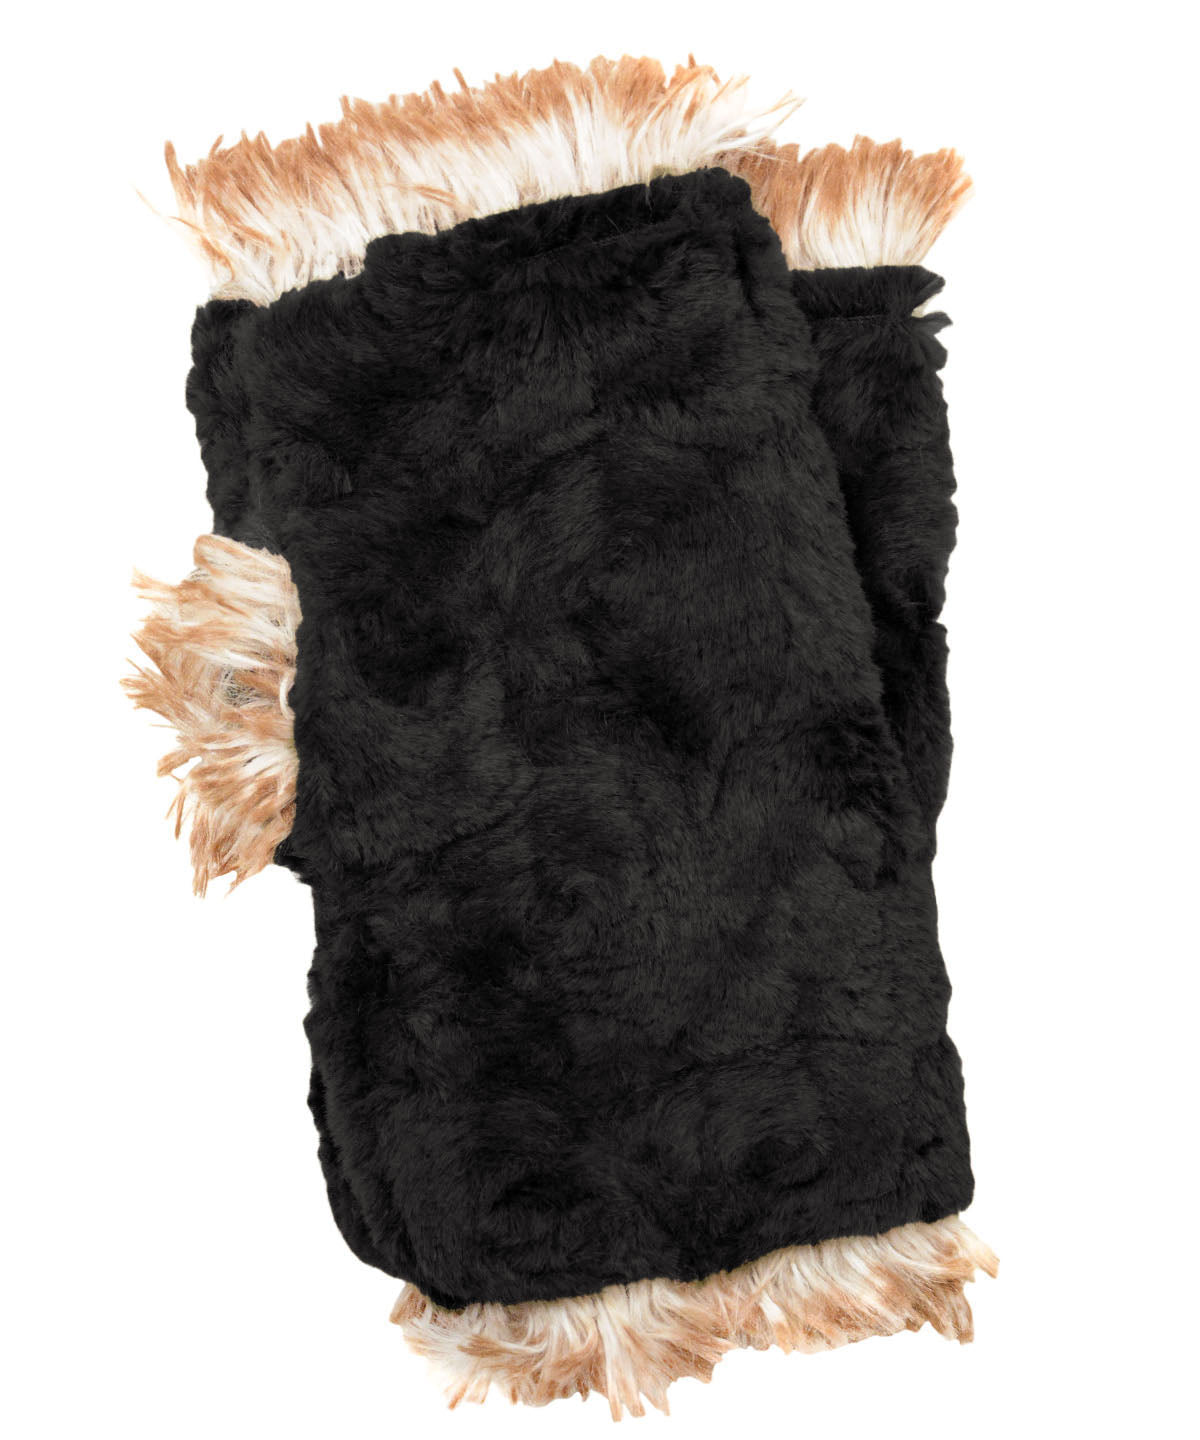 Reversible Fingerless Gloves | Red Fox Faux Fur lined Cuddly Black | Pandemonium Millinery